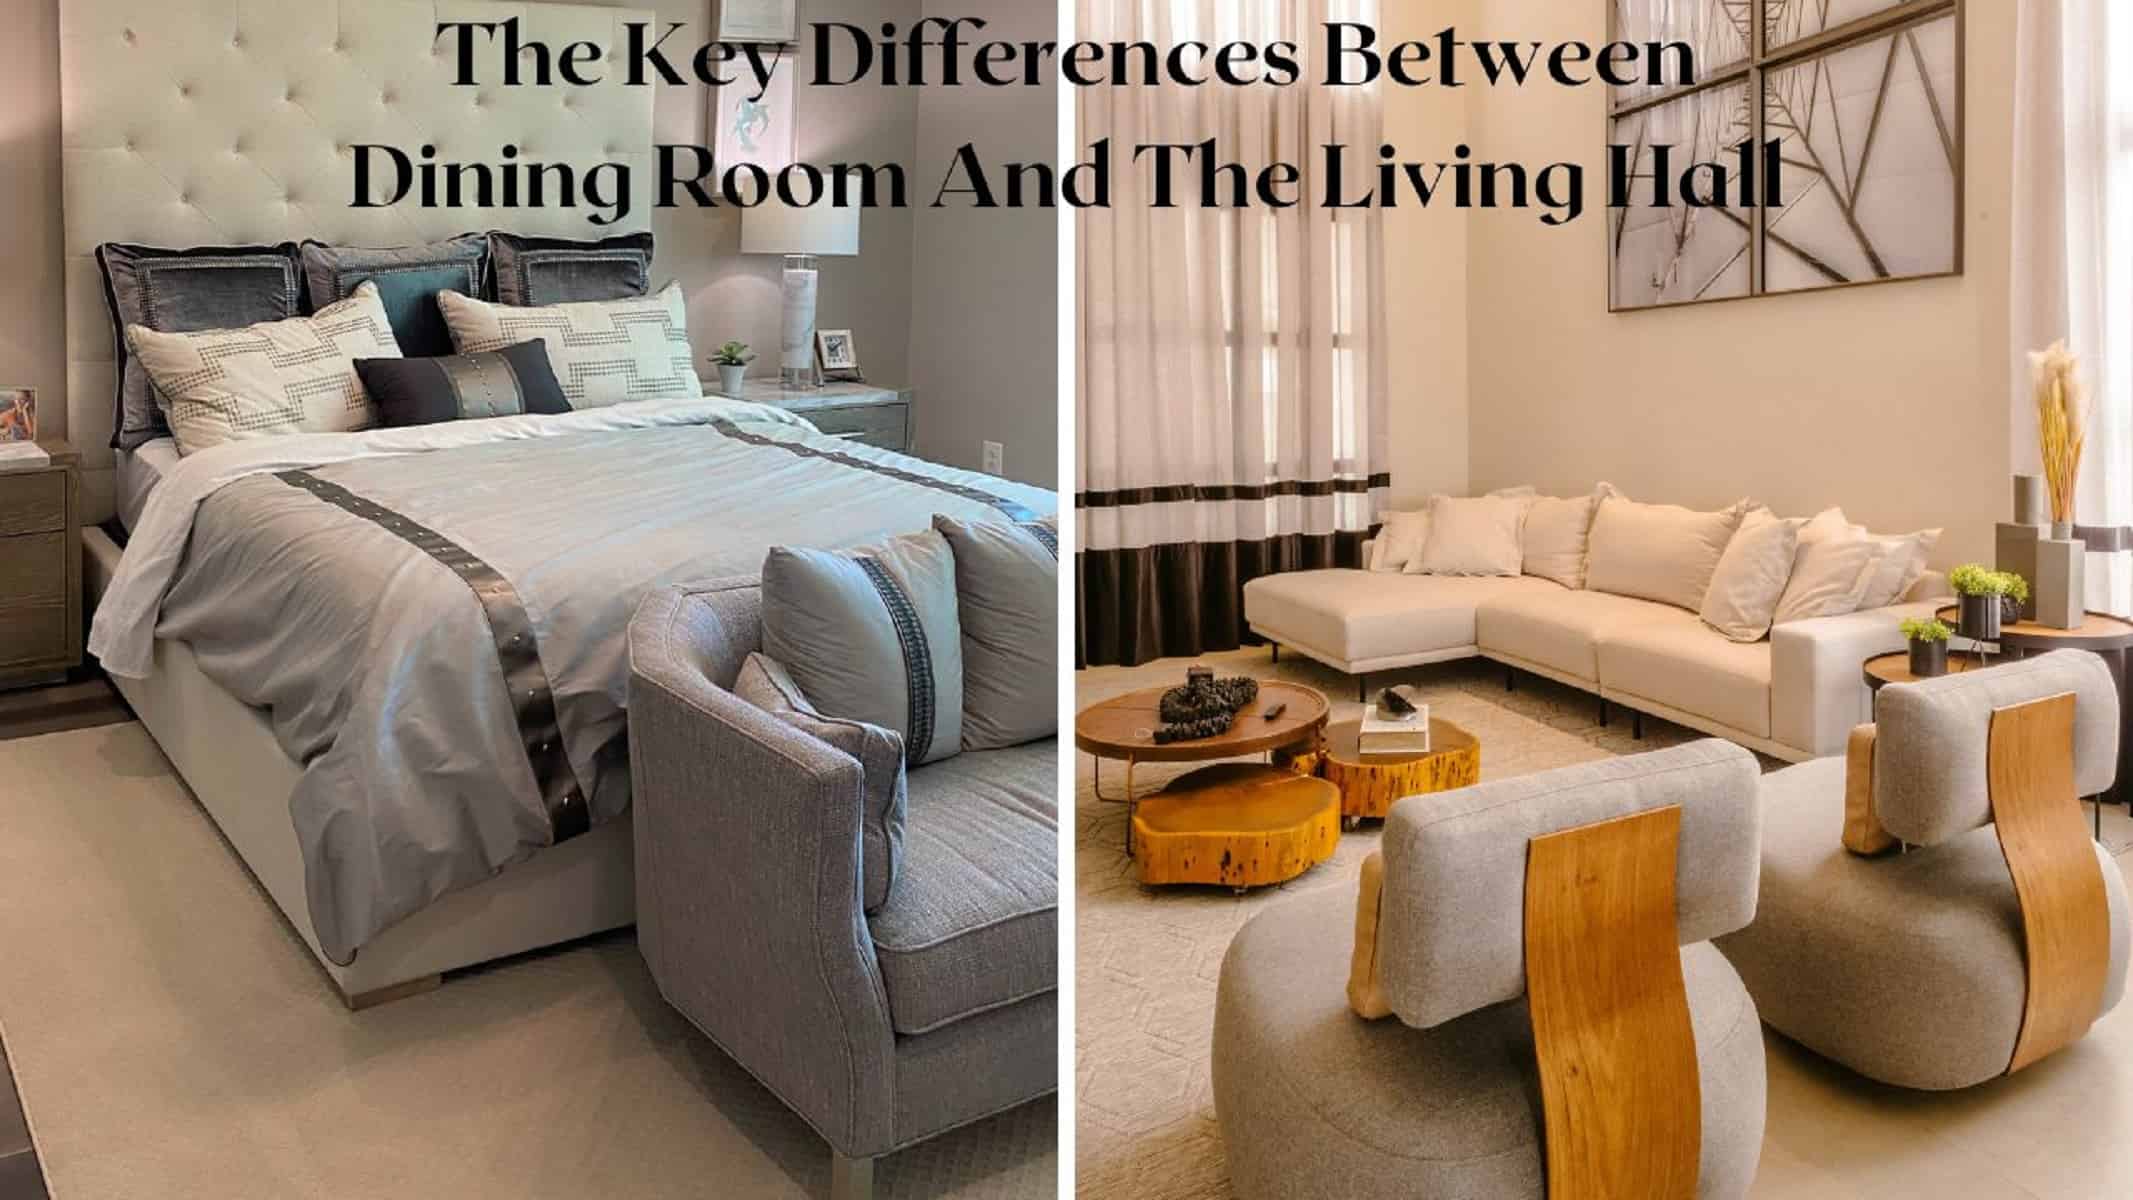 Key Differences Between Dining Room And The Living Hall